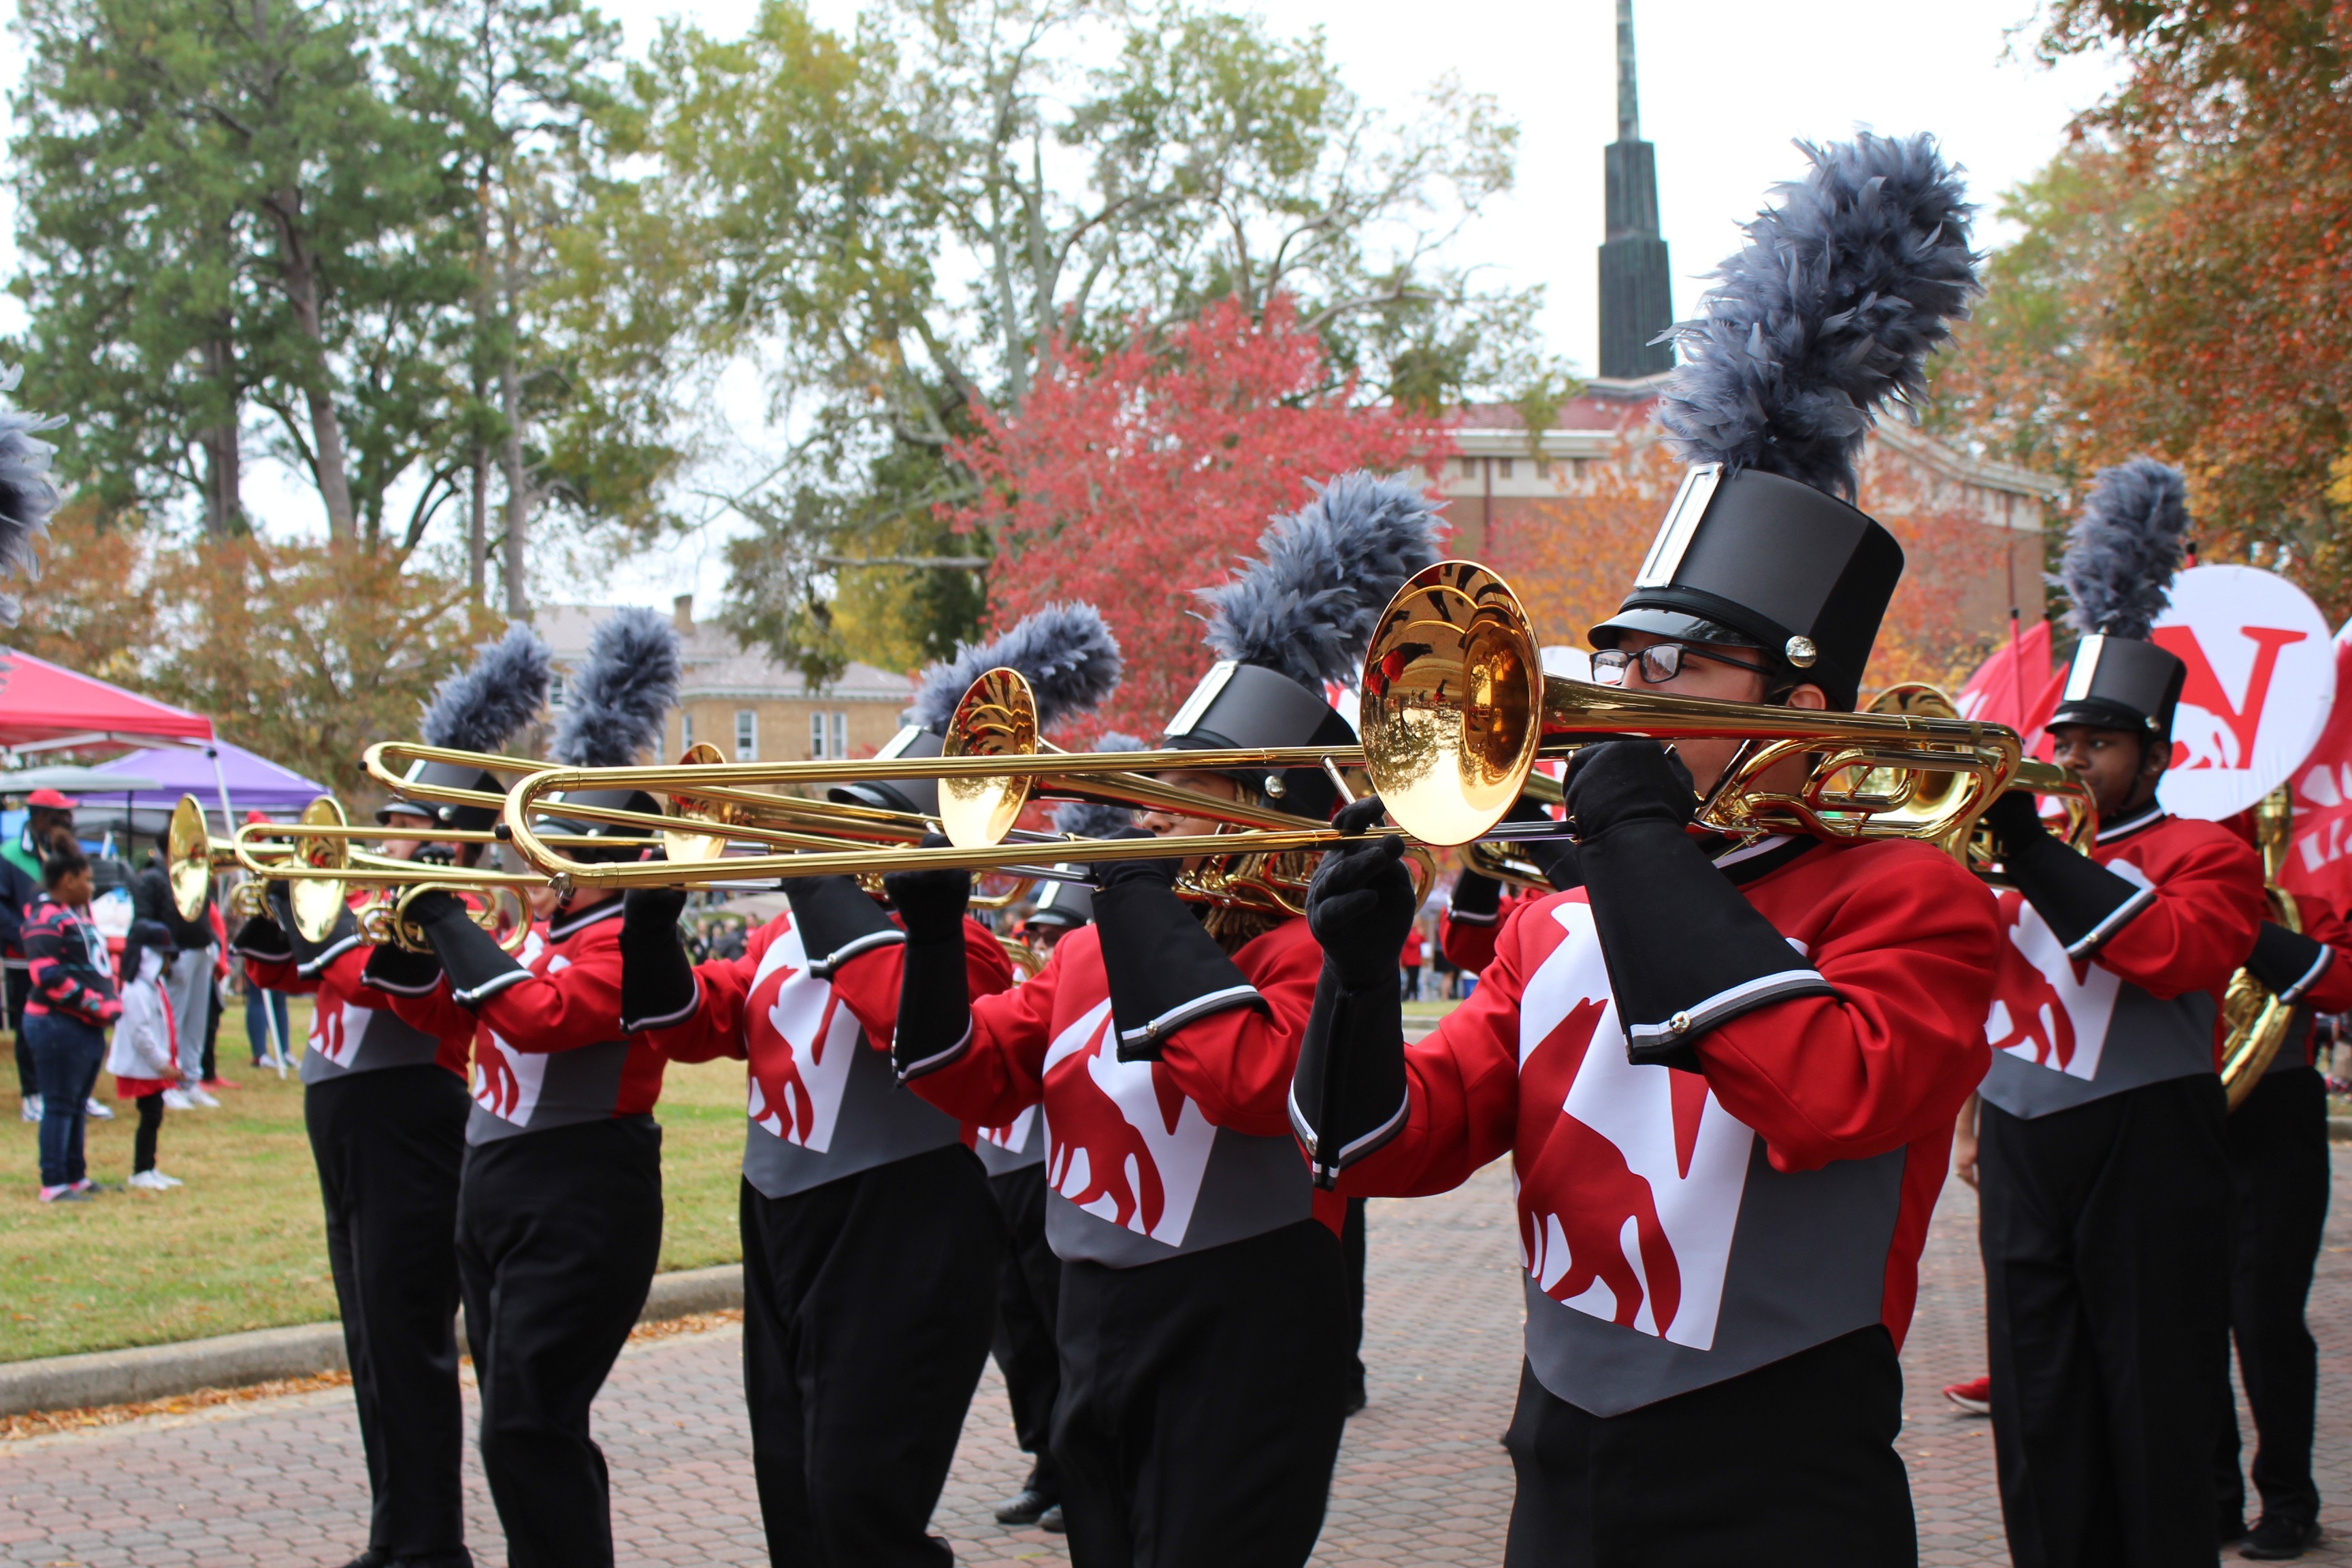 Trombone players of the Scarlet Spirit Marching Band at Homecoming